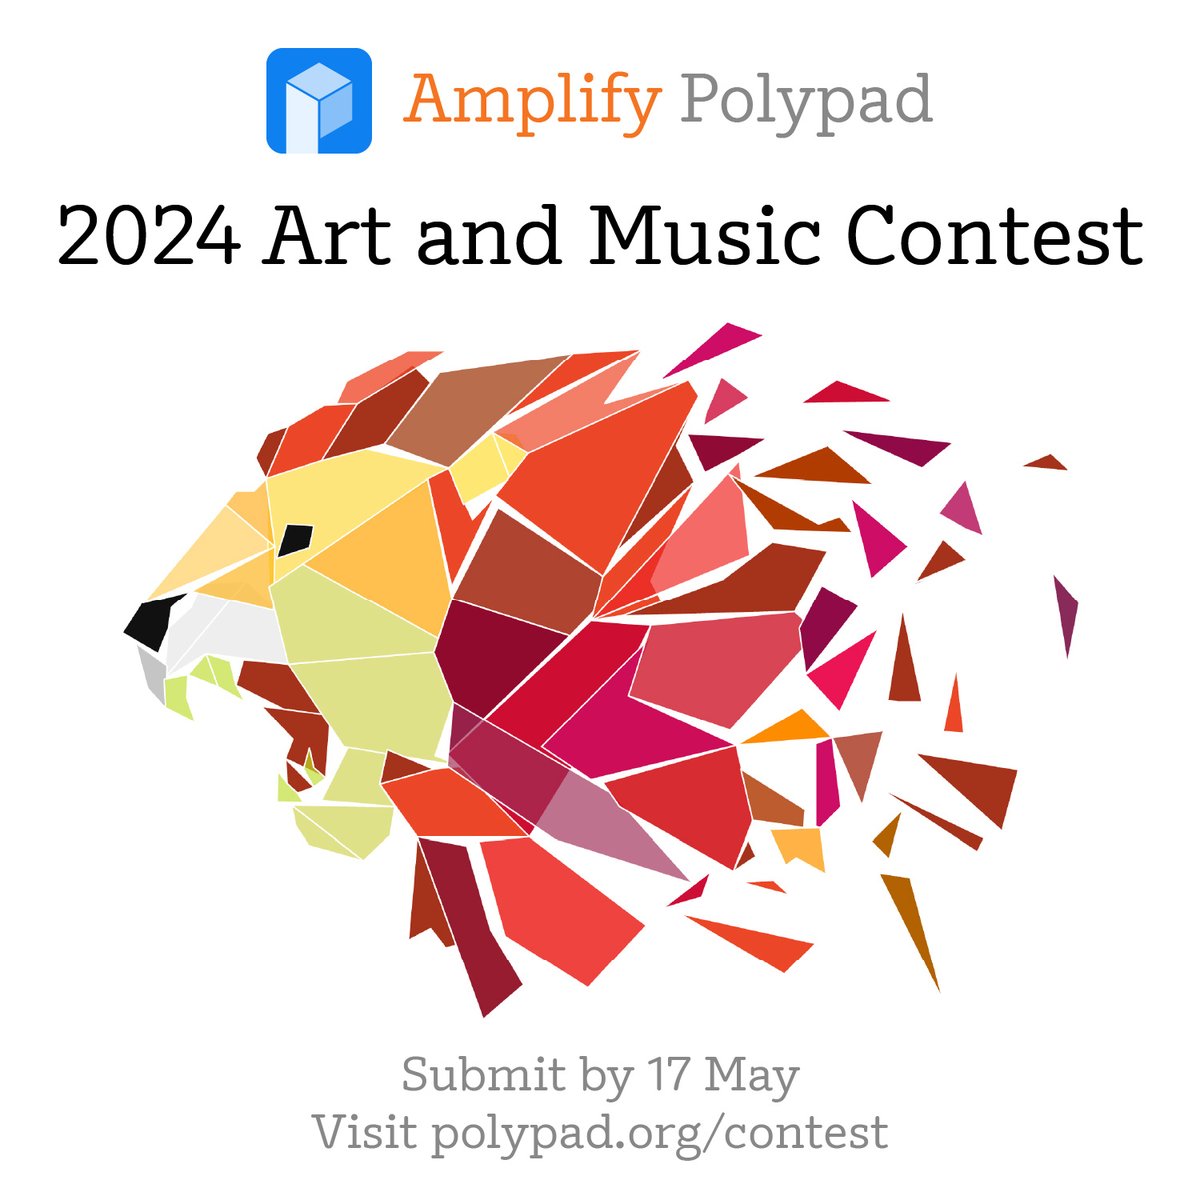 People have used Polypad to create beautiful pieces of artwork, music, games, puzzles, visualisations of mathematical concepts, and much more. They want to see what else you can do! Prizes and age categories at polypad.amplify.com/contest